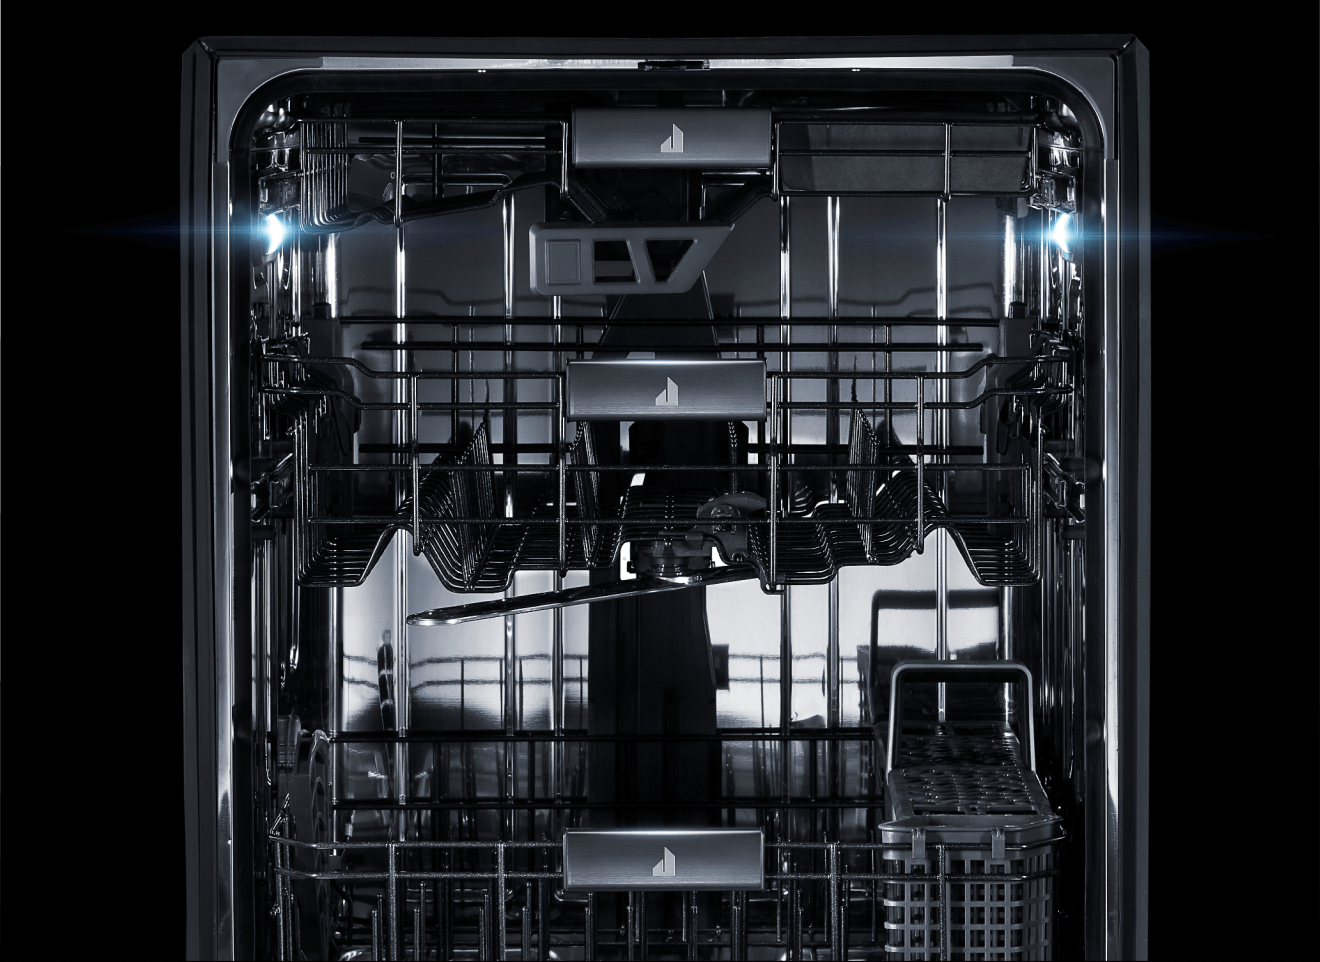 The interior of a JennAir® dishwasher, lit up and clearly visible.